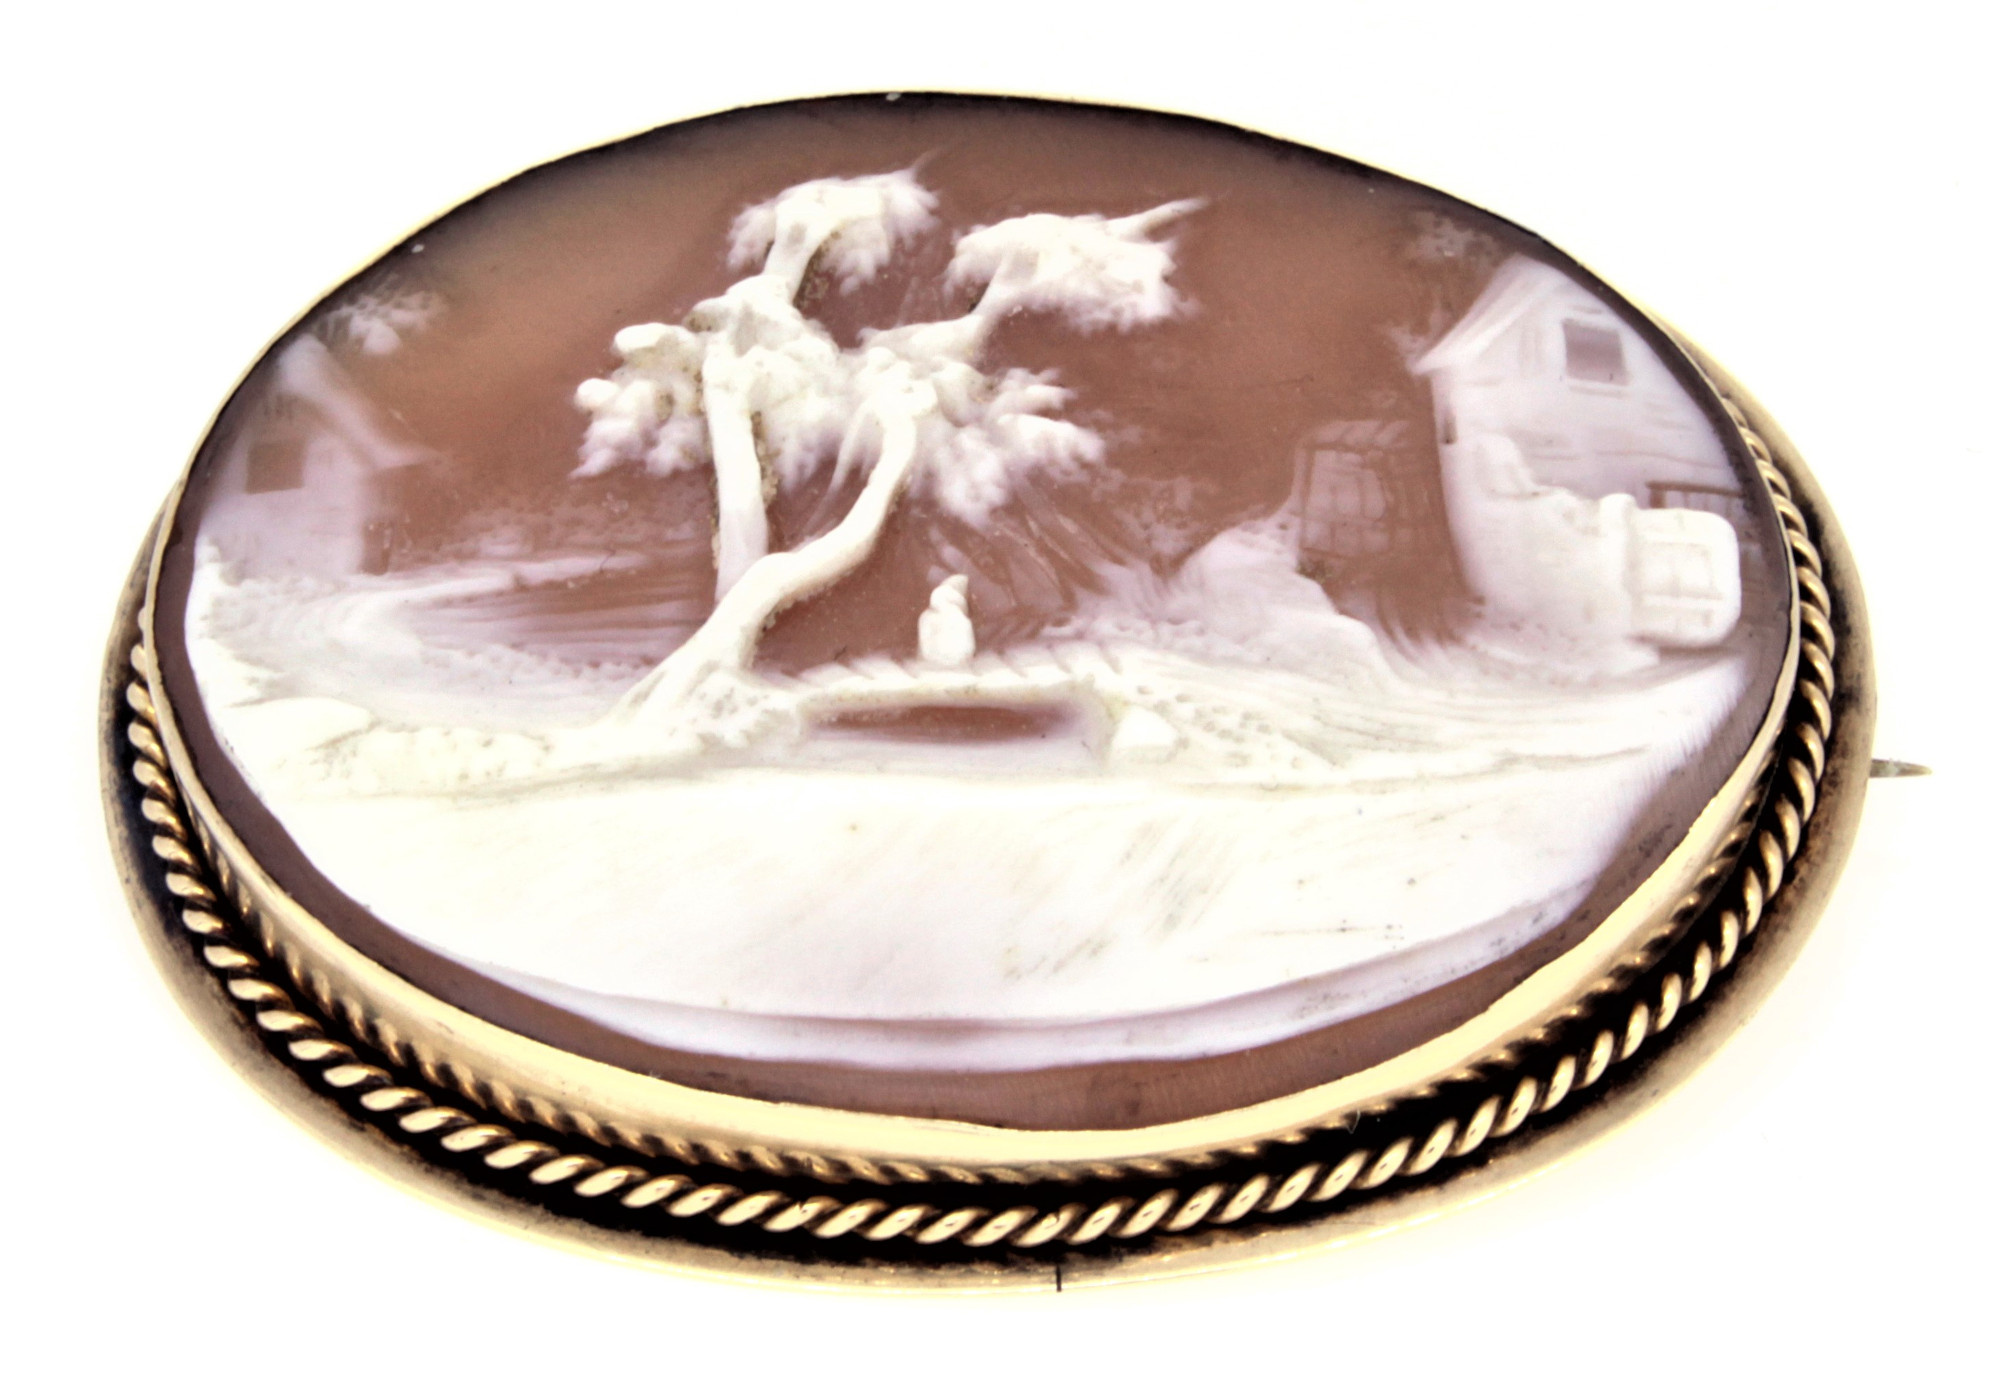 10K Gold Filled Mid-1800's Victorian Hand-Carved White Shell Cameo Brooch-1